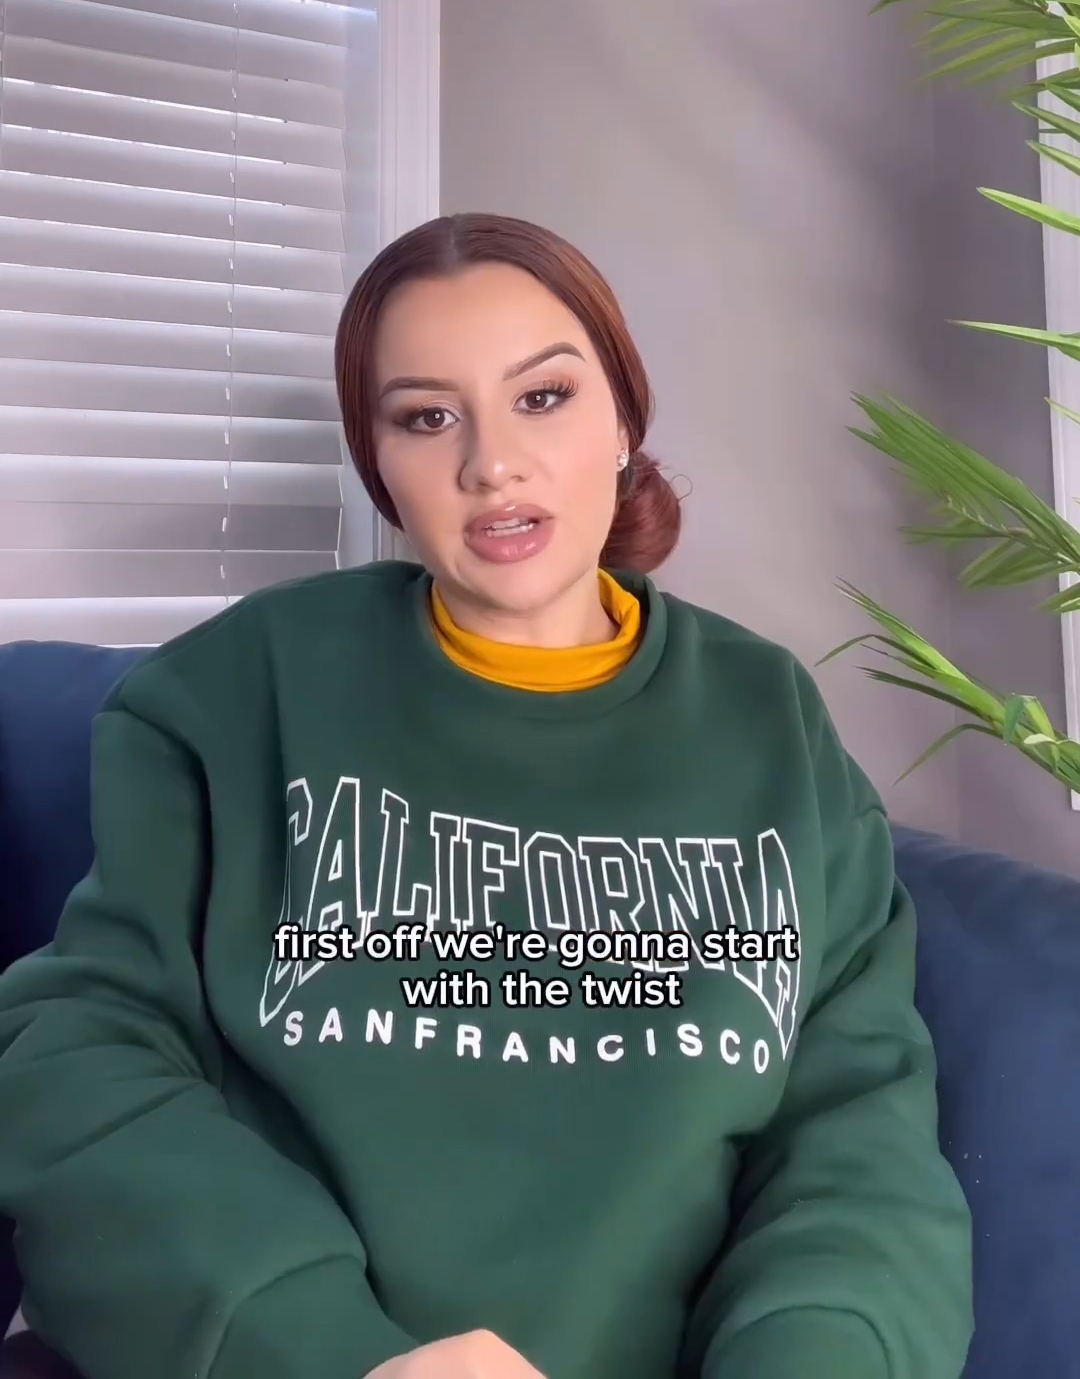 Kayla recently fueled rumors she was pregnant after donning an oversized sweatshirt in social media posts